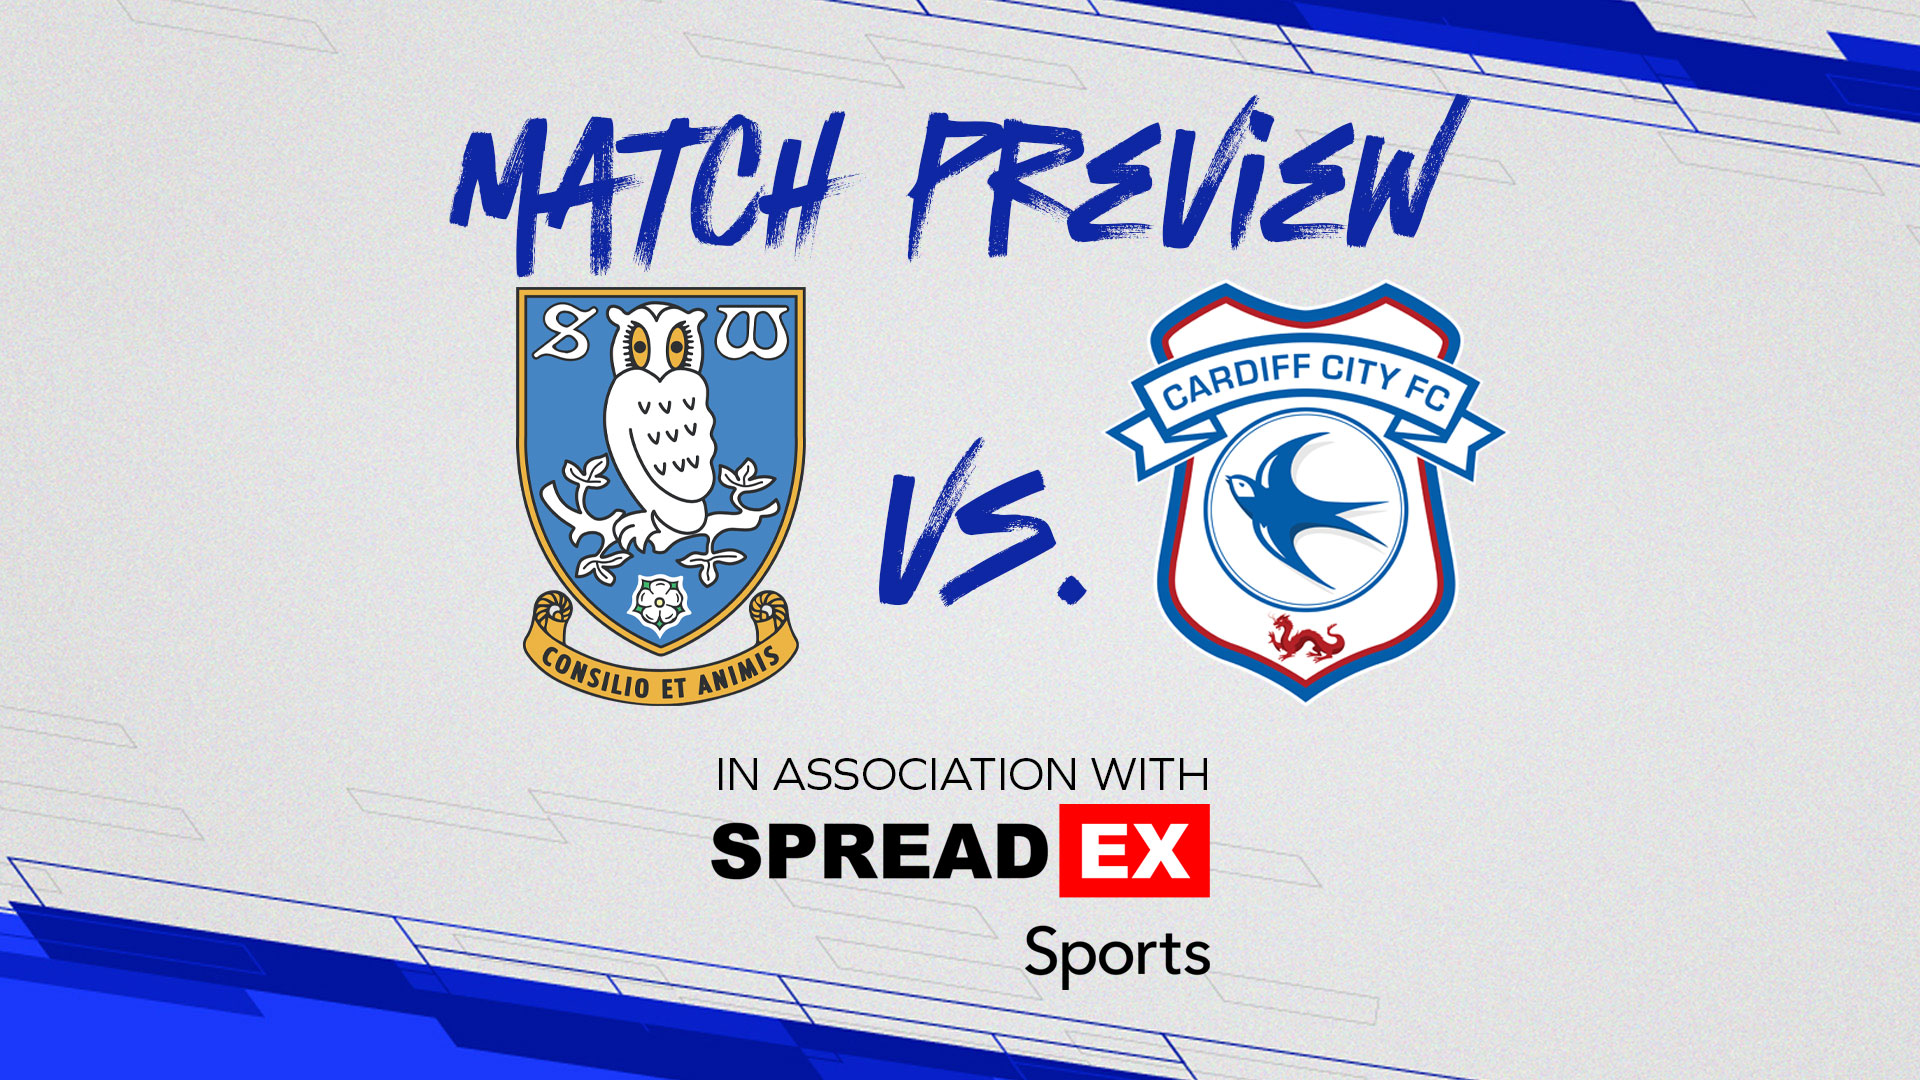 Match Preview: Sheffield Wednesday vs. Cardiff City